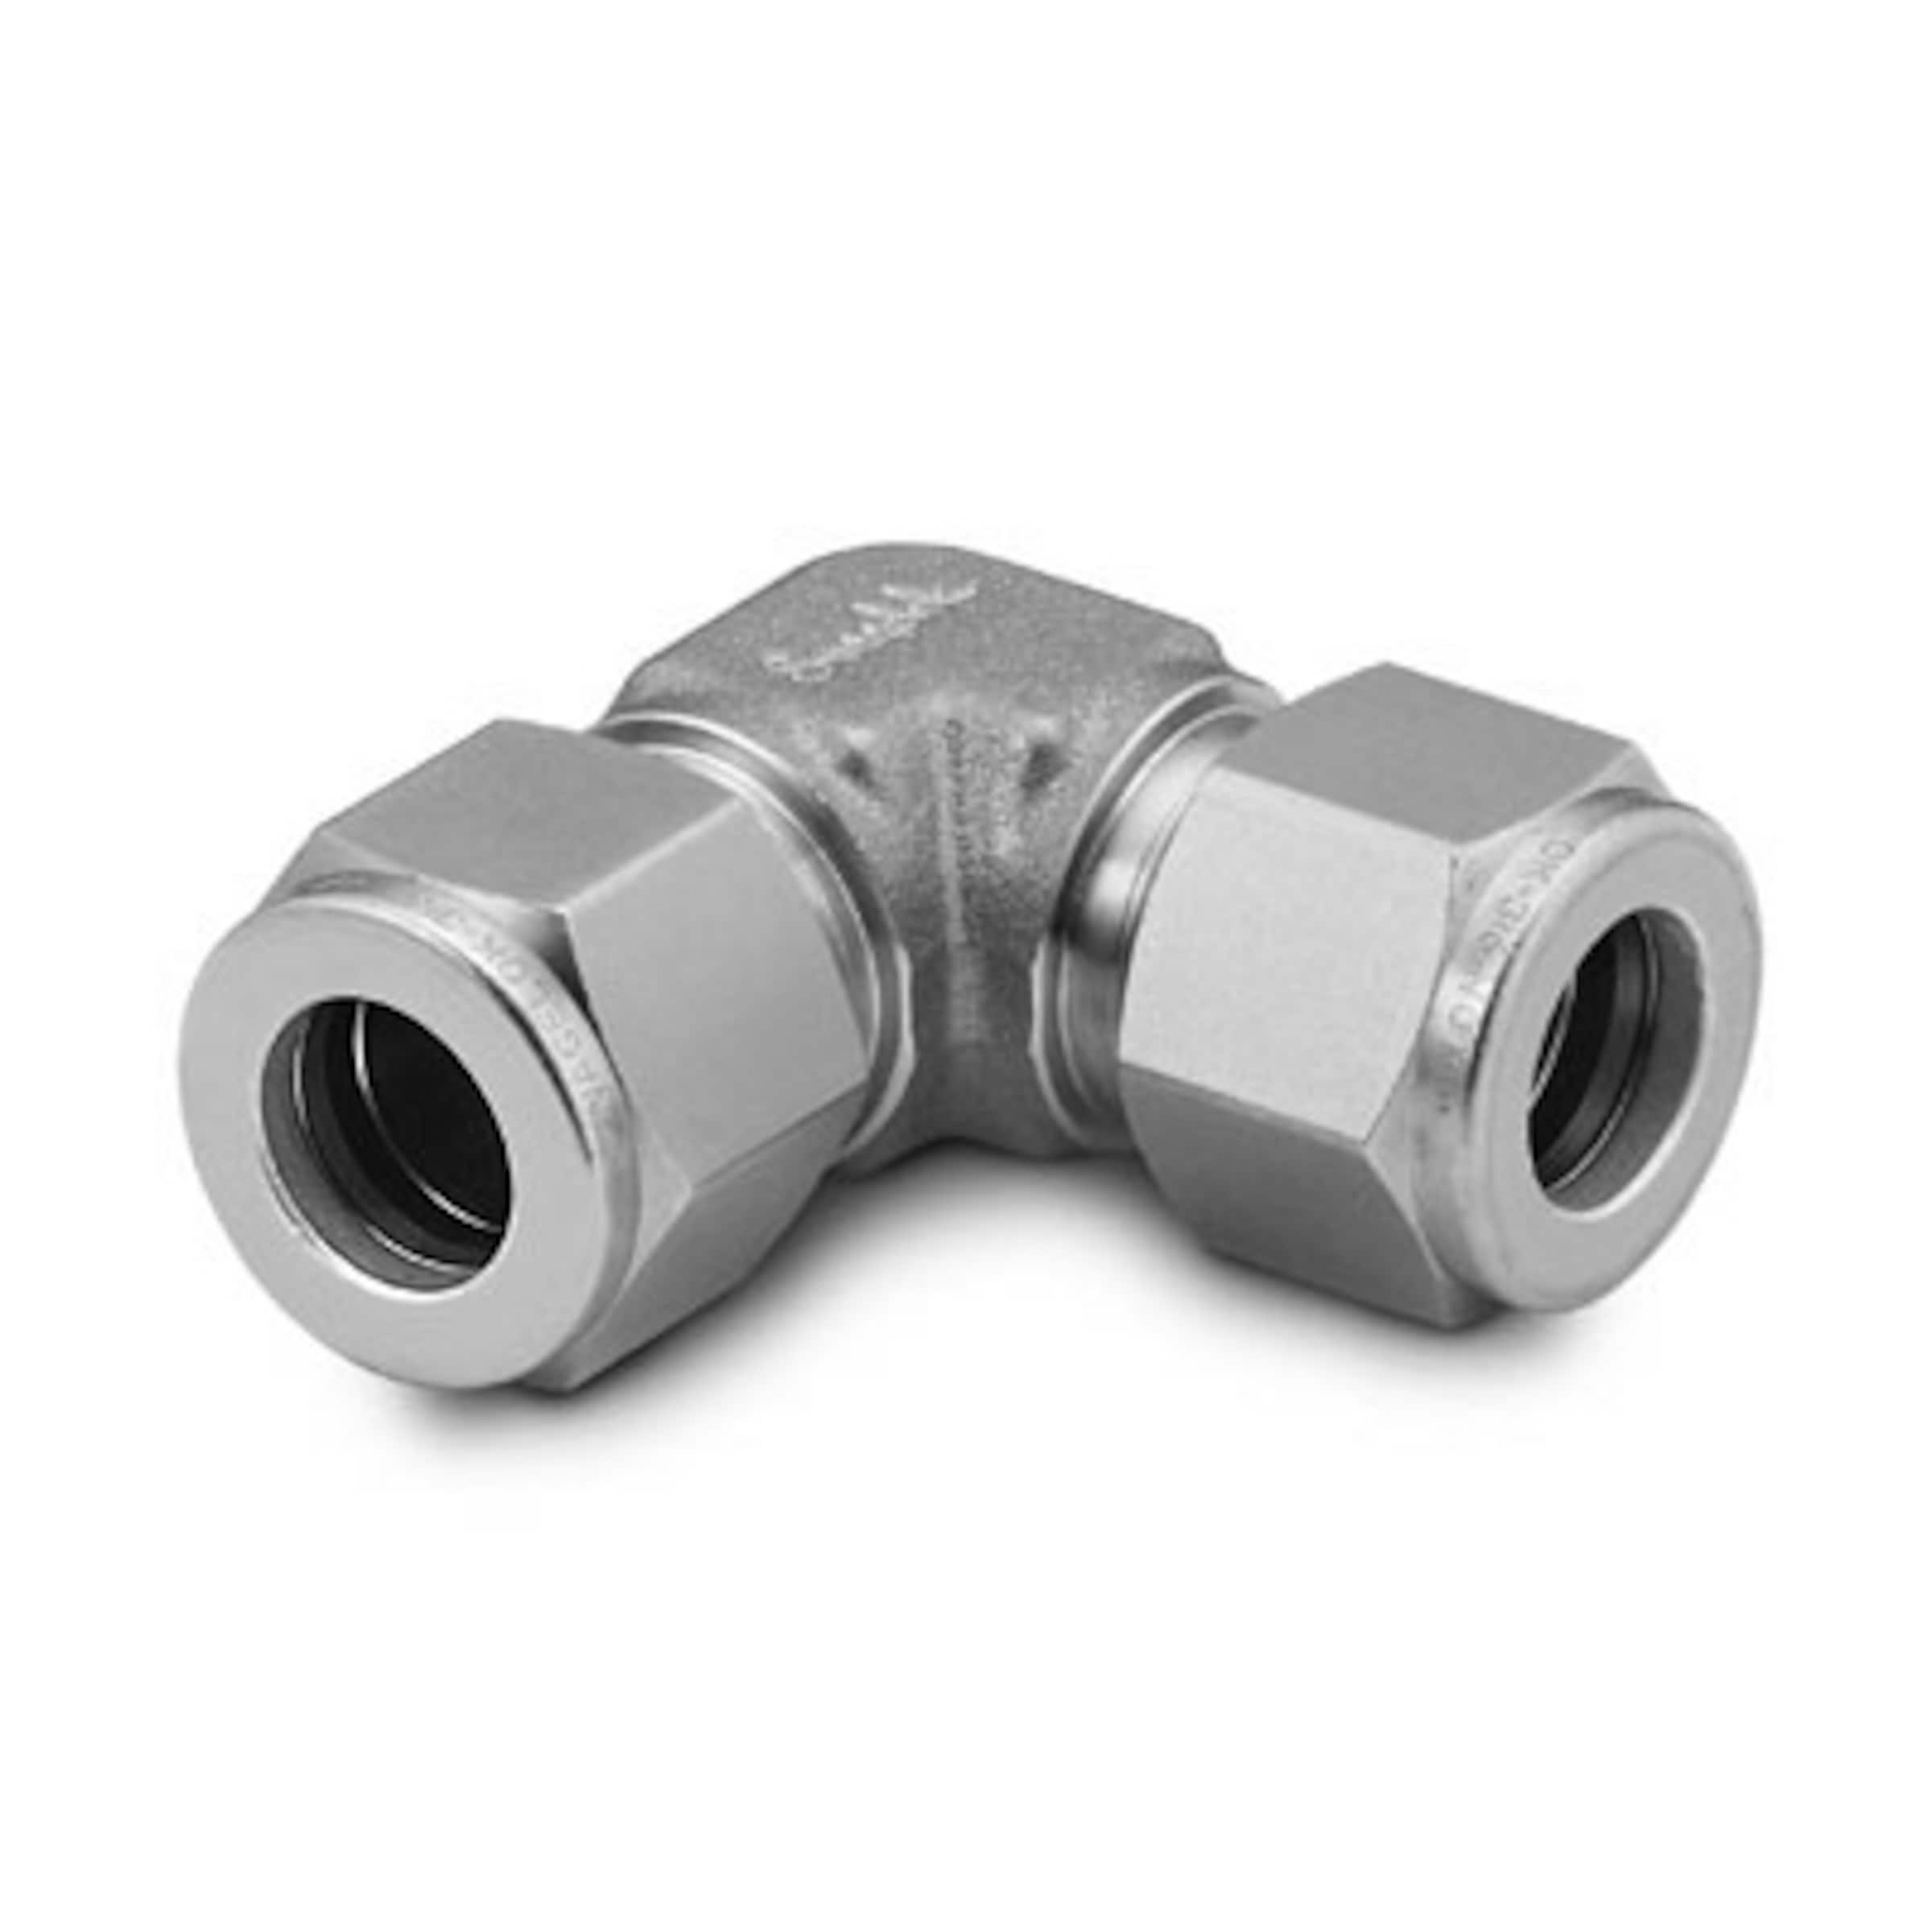 Stainless Steel Swagelok Tube Fitting, Union Elbow, 1/2 in. Tube